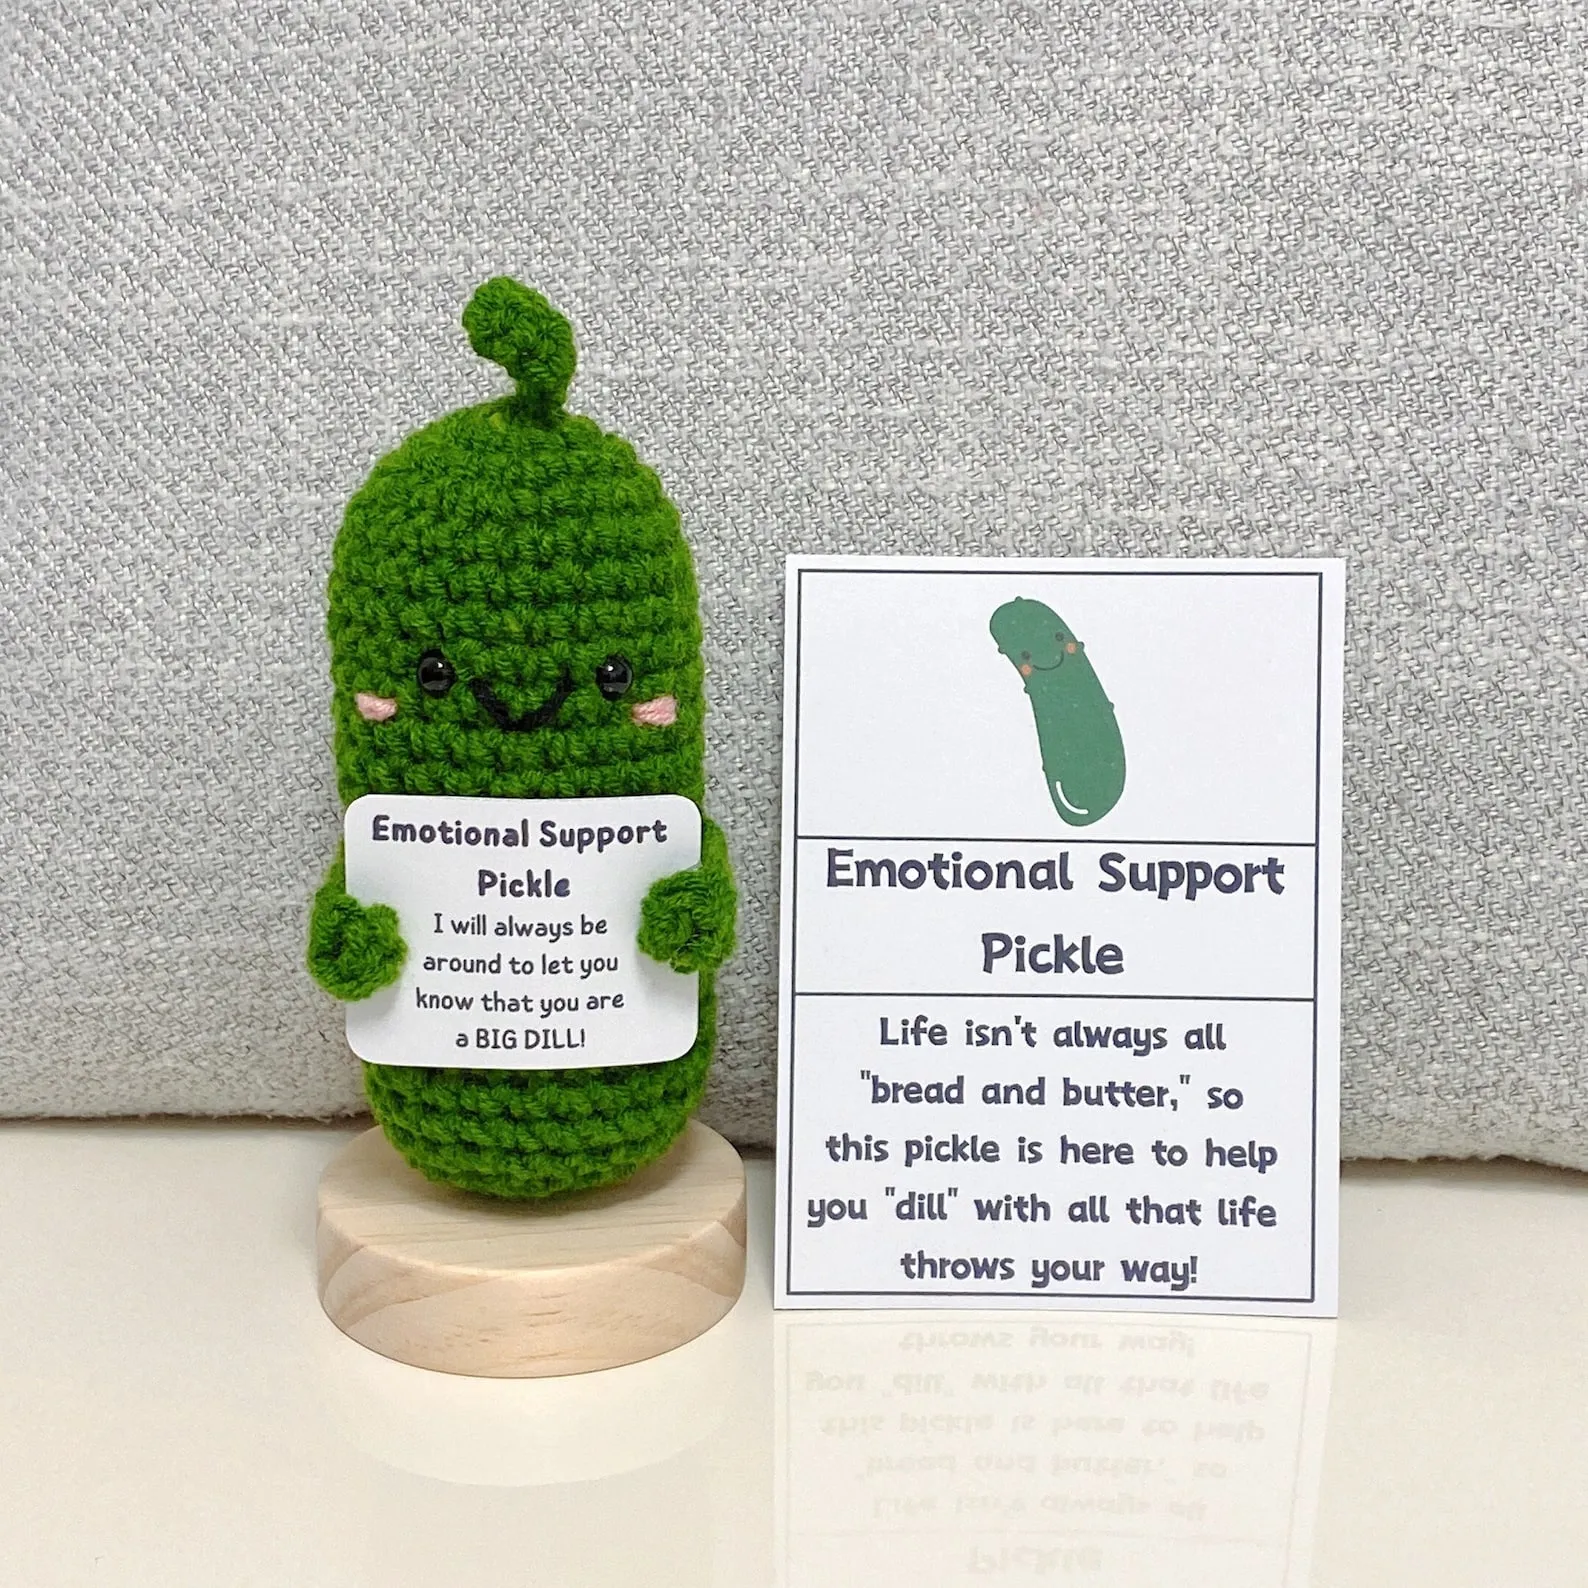 🥒HANDMADE EMOTIONAL SUPPORT PICKLED CUCUMBER GIFT